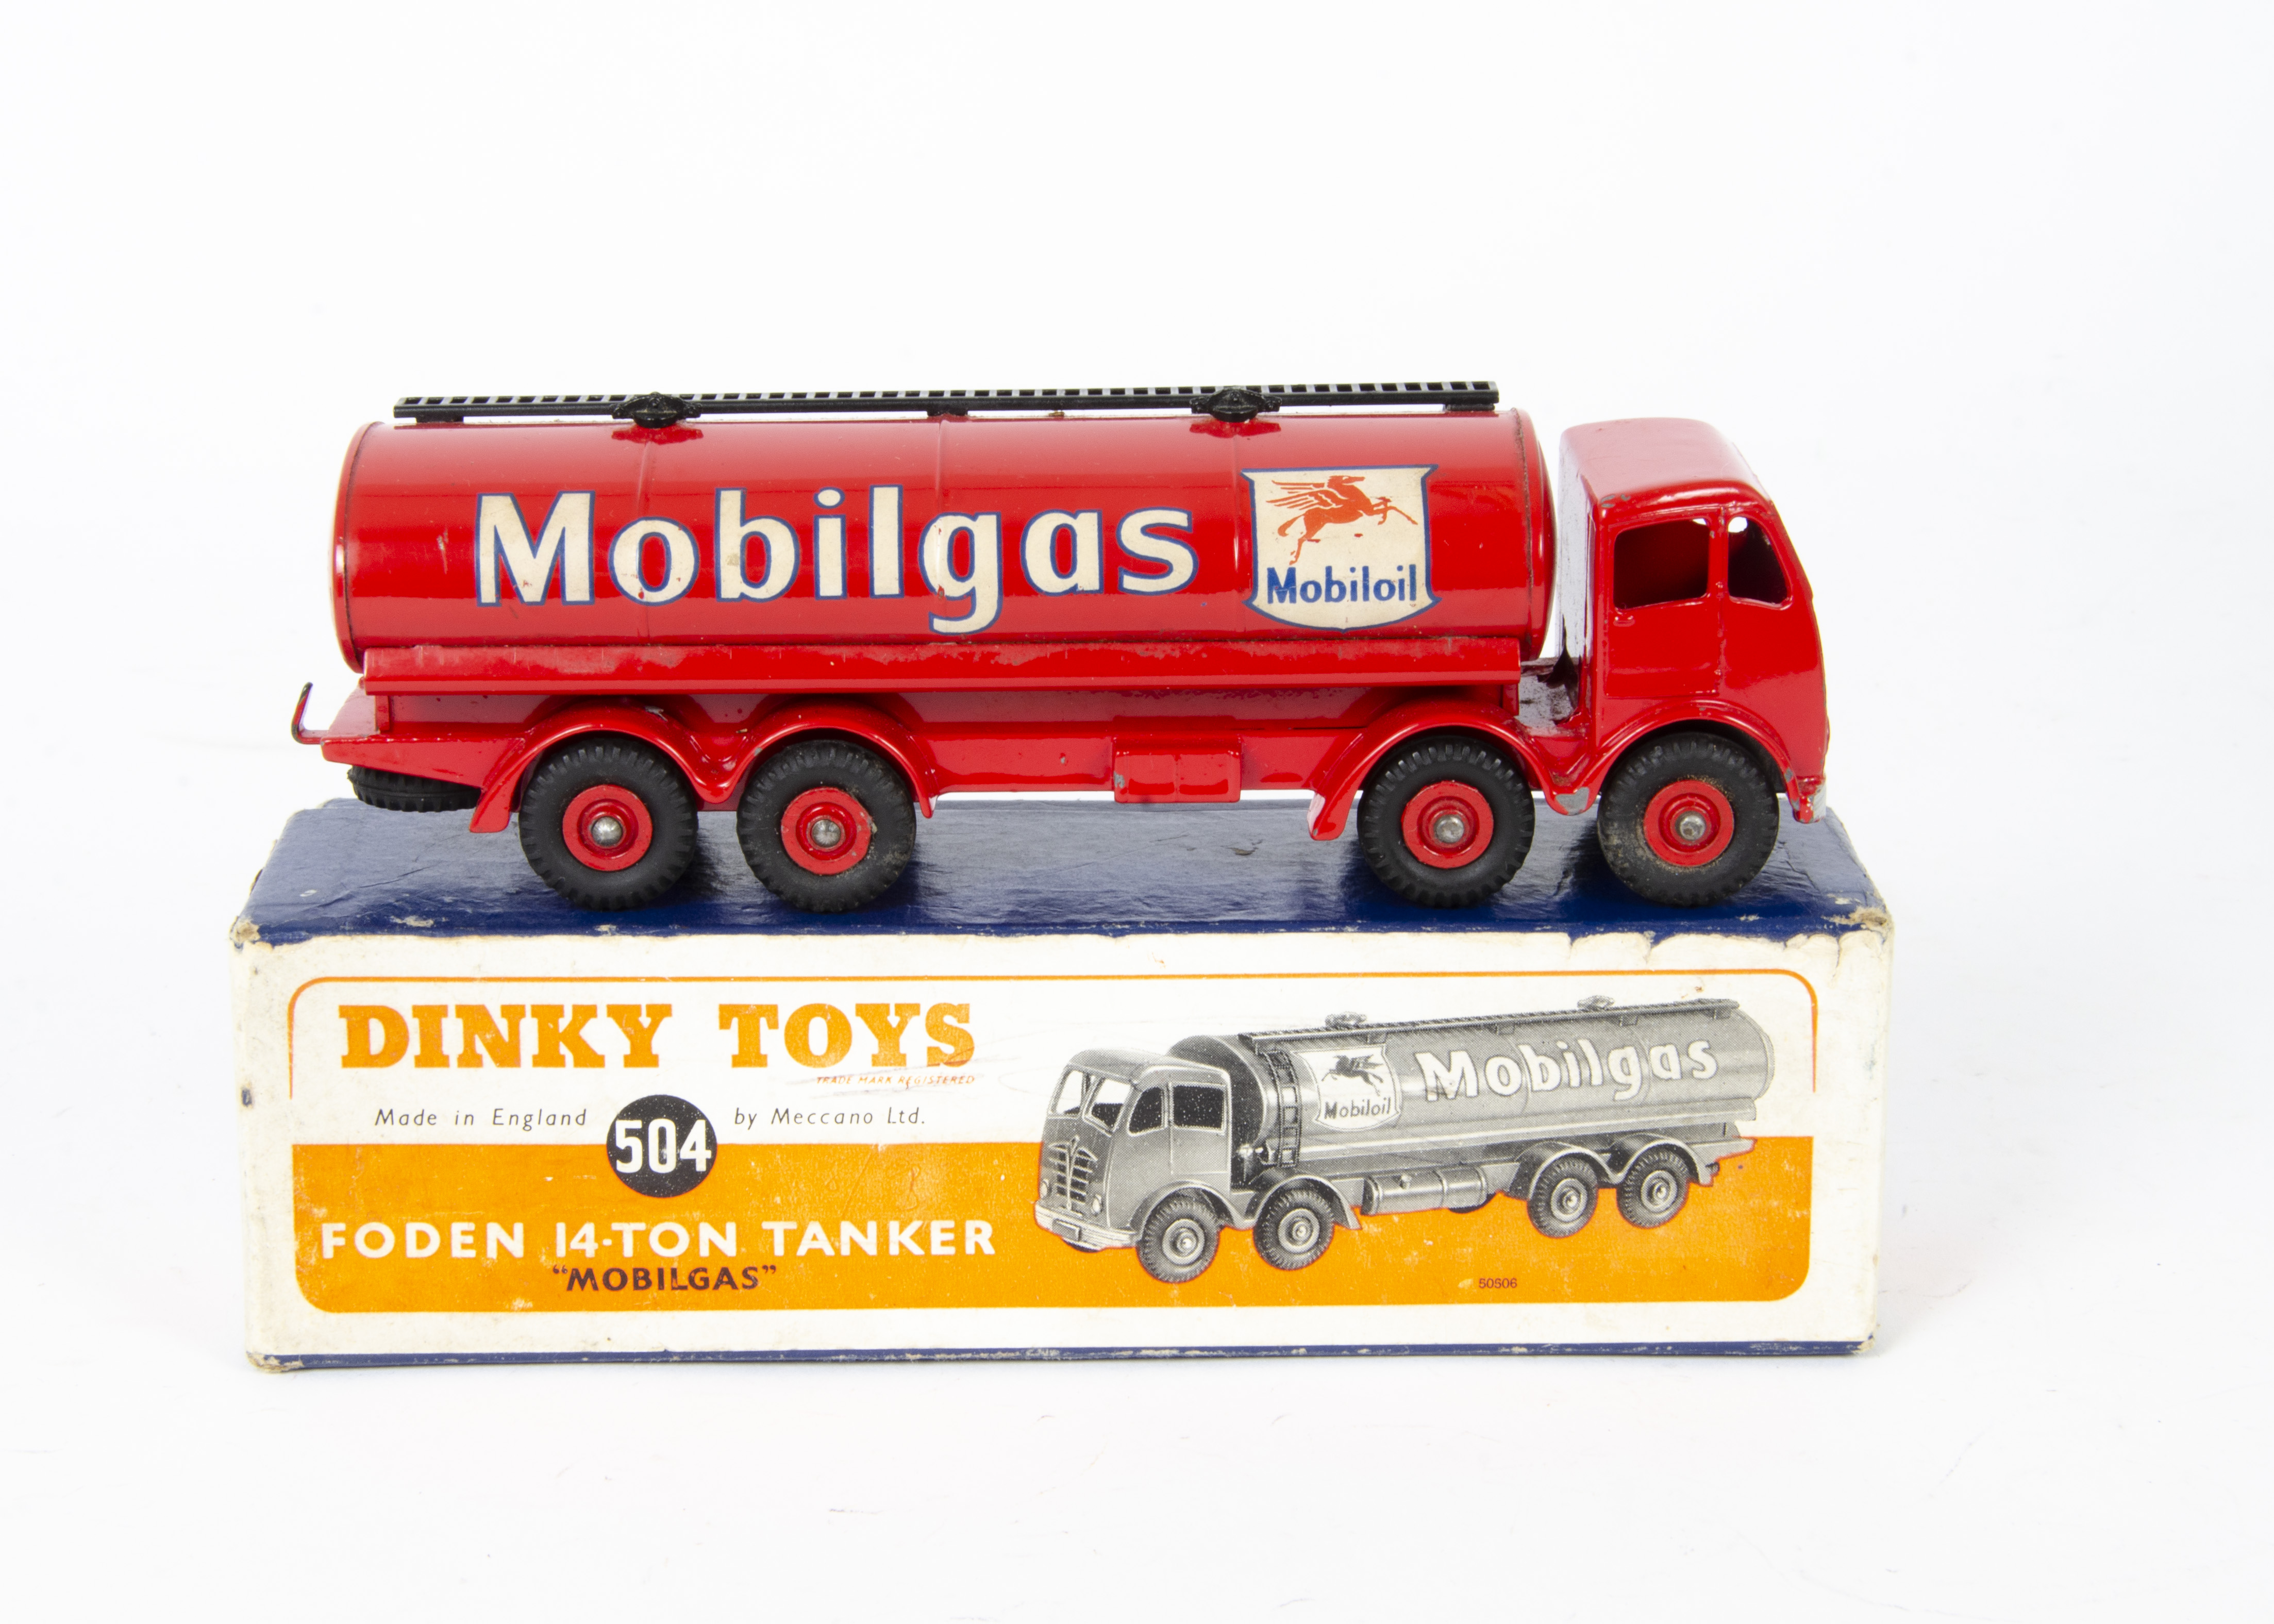 A Dinky Toys 504 Foden 14-Ton ~Mobilgas~ Tanker, 2nd type red cab, chassis, tank and grooved hubs,